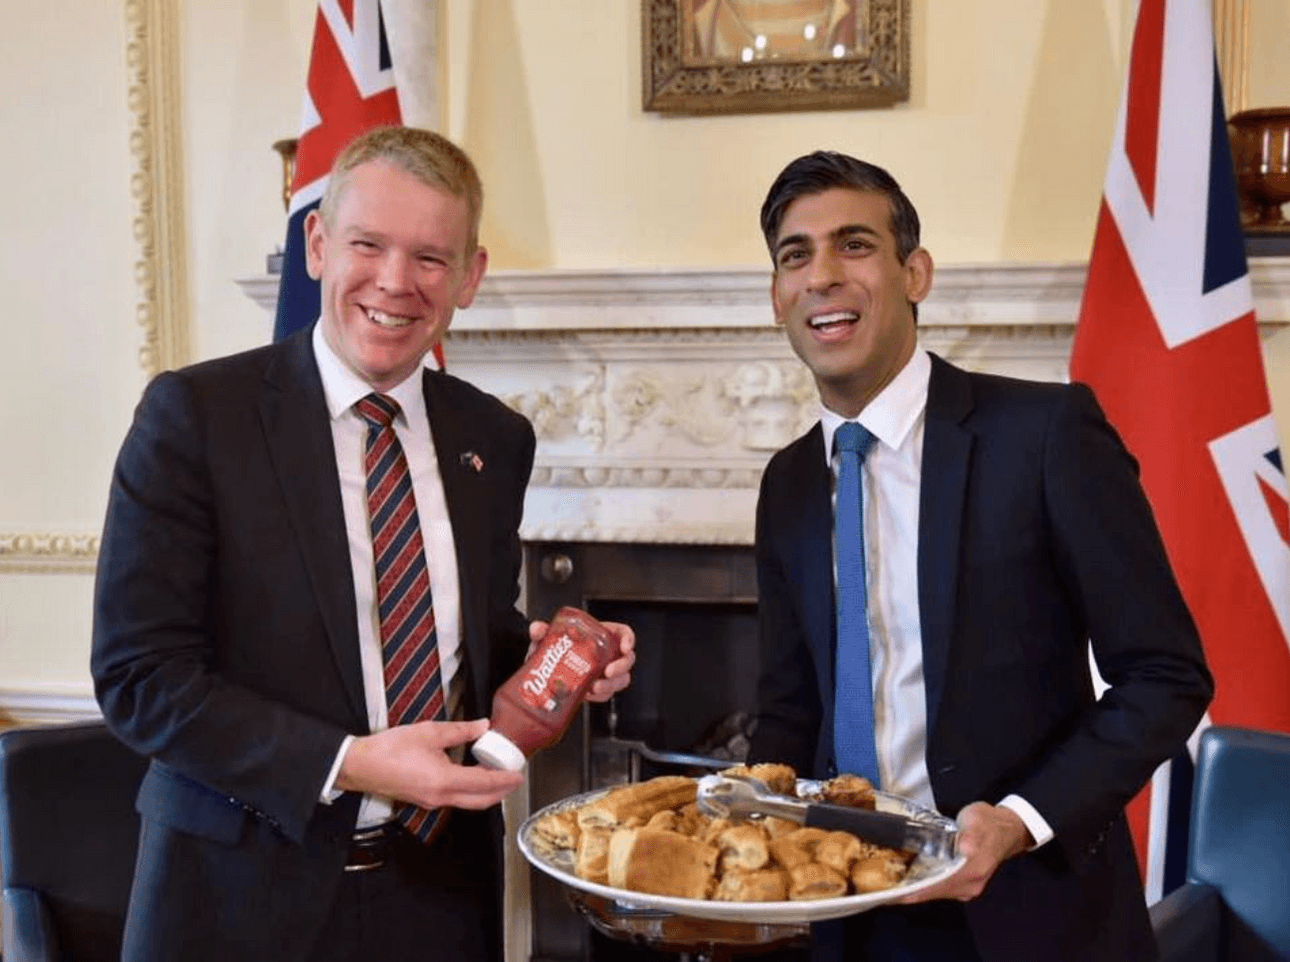 Chris Hipkins smiles with a bottle of Wattie's tomato sauce while standing next to UK prime minister Rishi Sunak. Sunak is holding a large silver platter of sausage rolls.